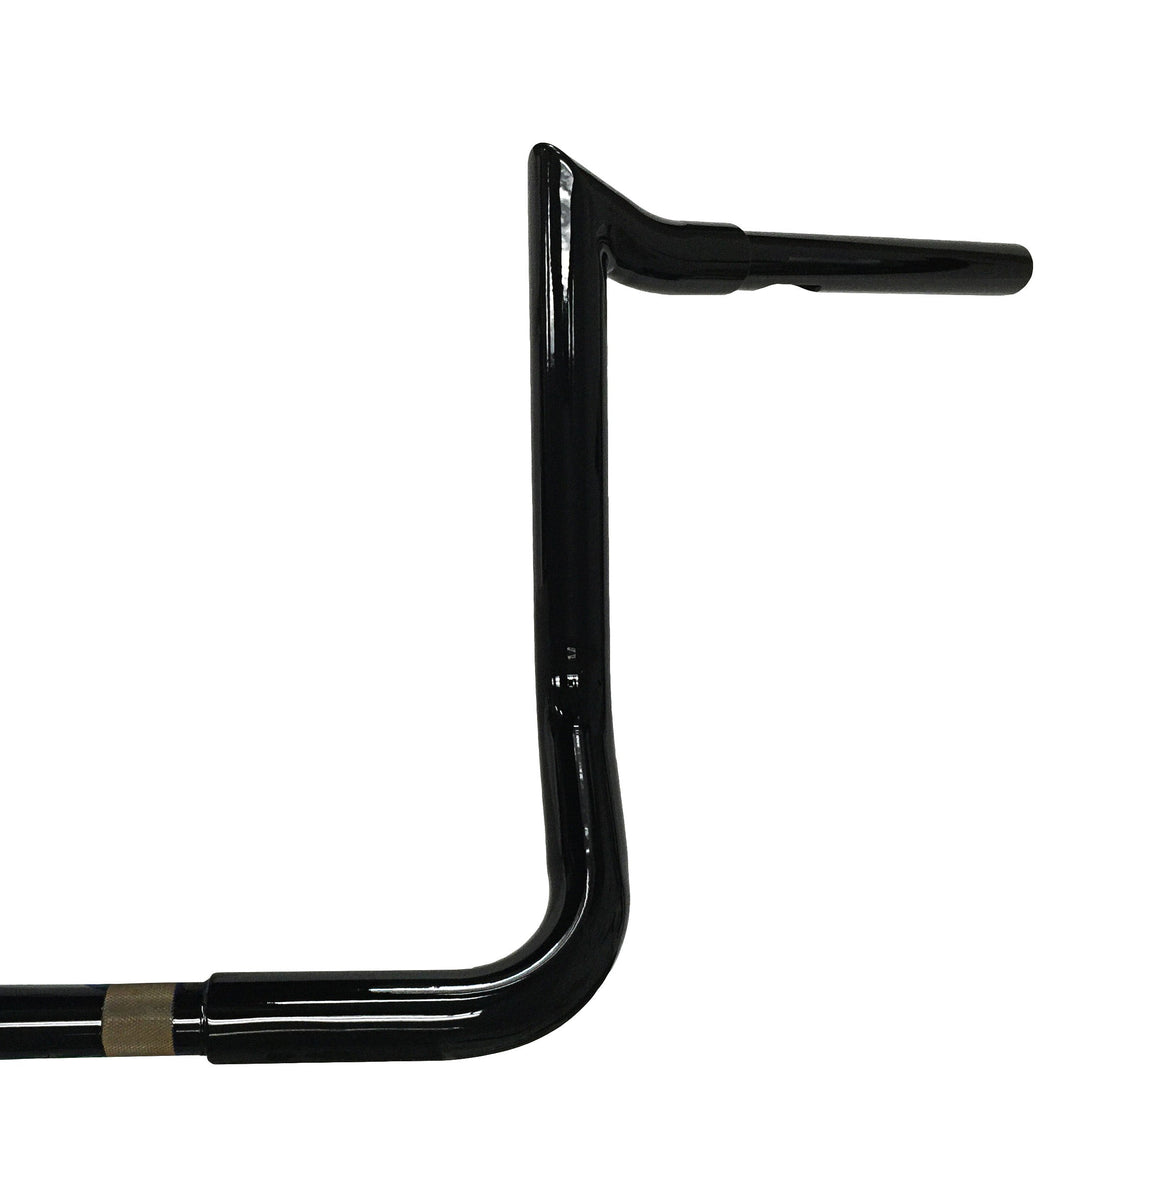  Dominator Industries 1 1/4 PRE-Wired 14 Black Meat Hook Bar Ape  Hangers Compatible with Harley-Davidson Bagger Electra - Handlebars  2014-2023 Heated Grip Option : Automotive